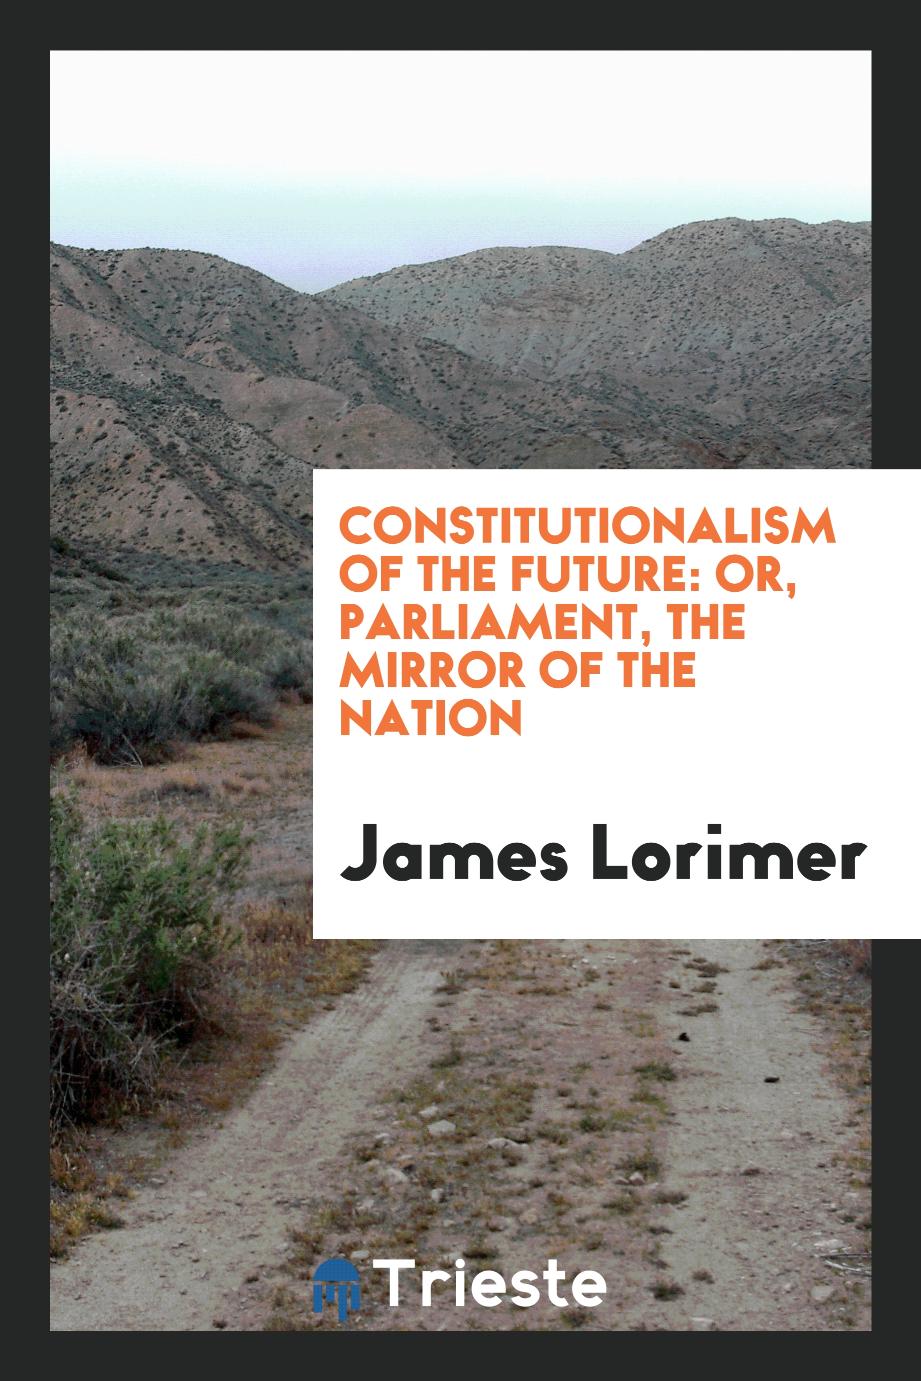 Constitutionalism of the Future: Or, Parliament, the Mirror of the Nation